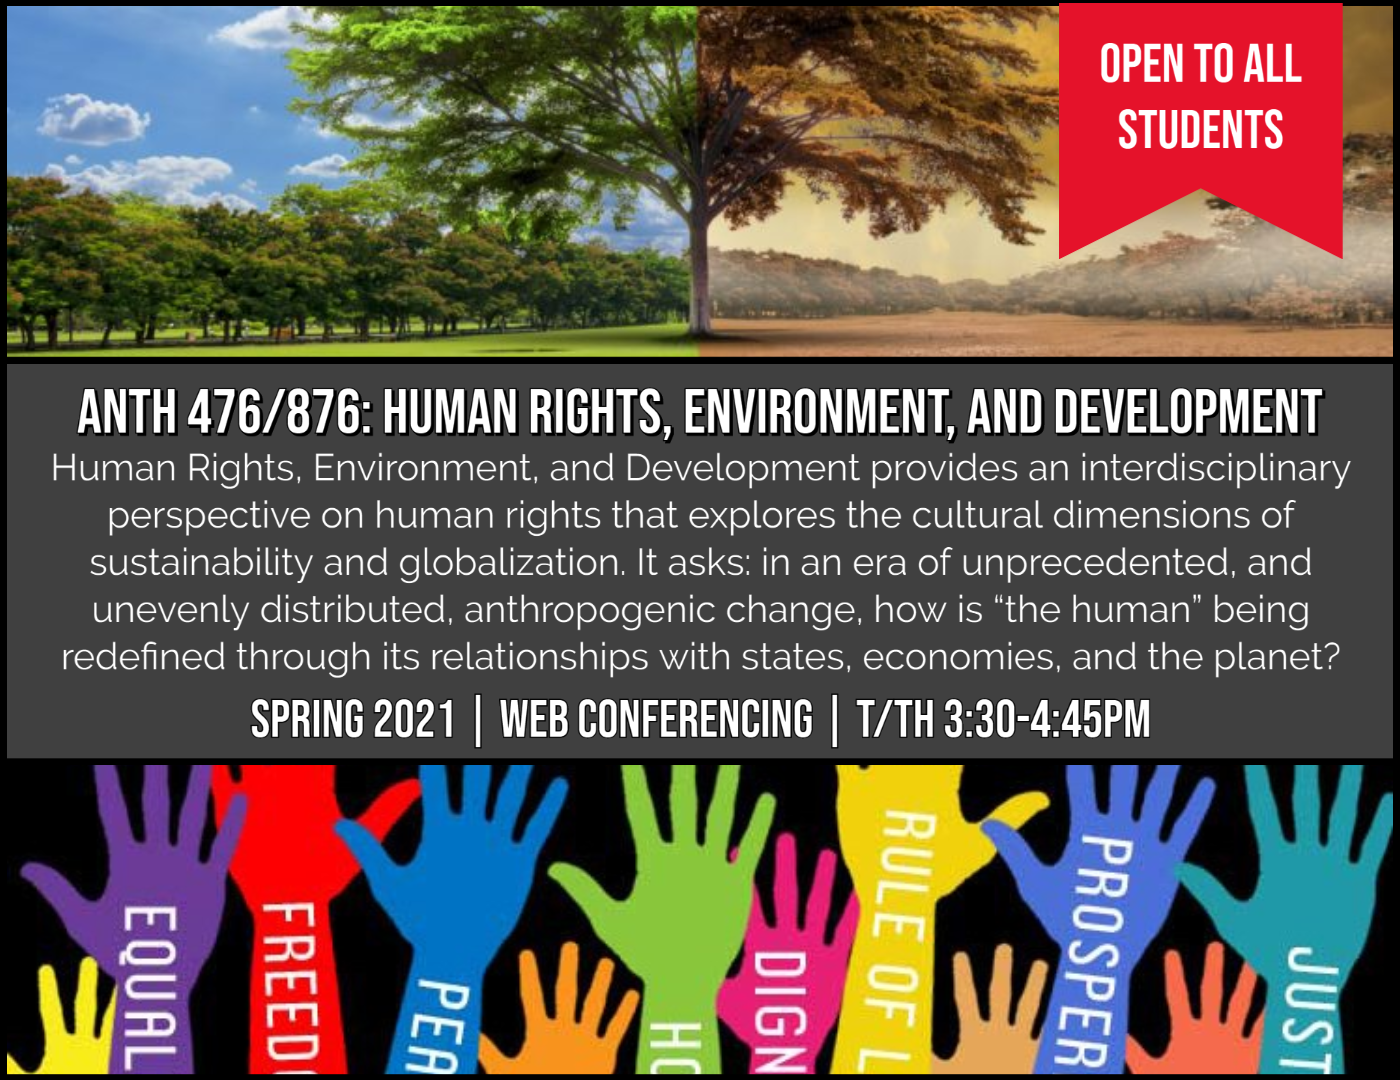 New Spring Course on Human Rights, Environment and Development